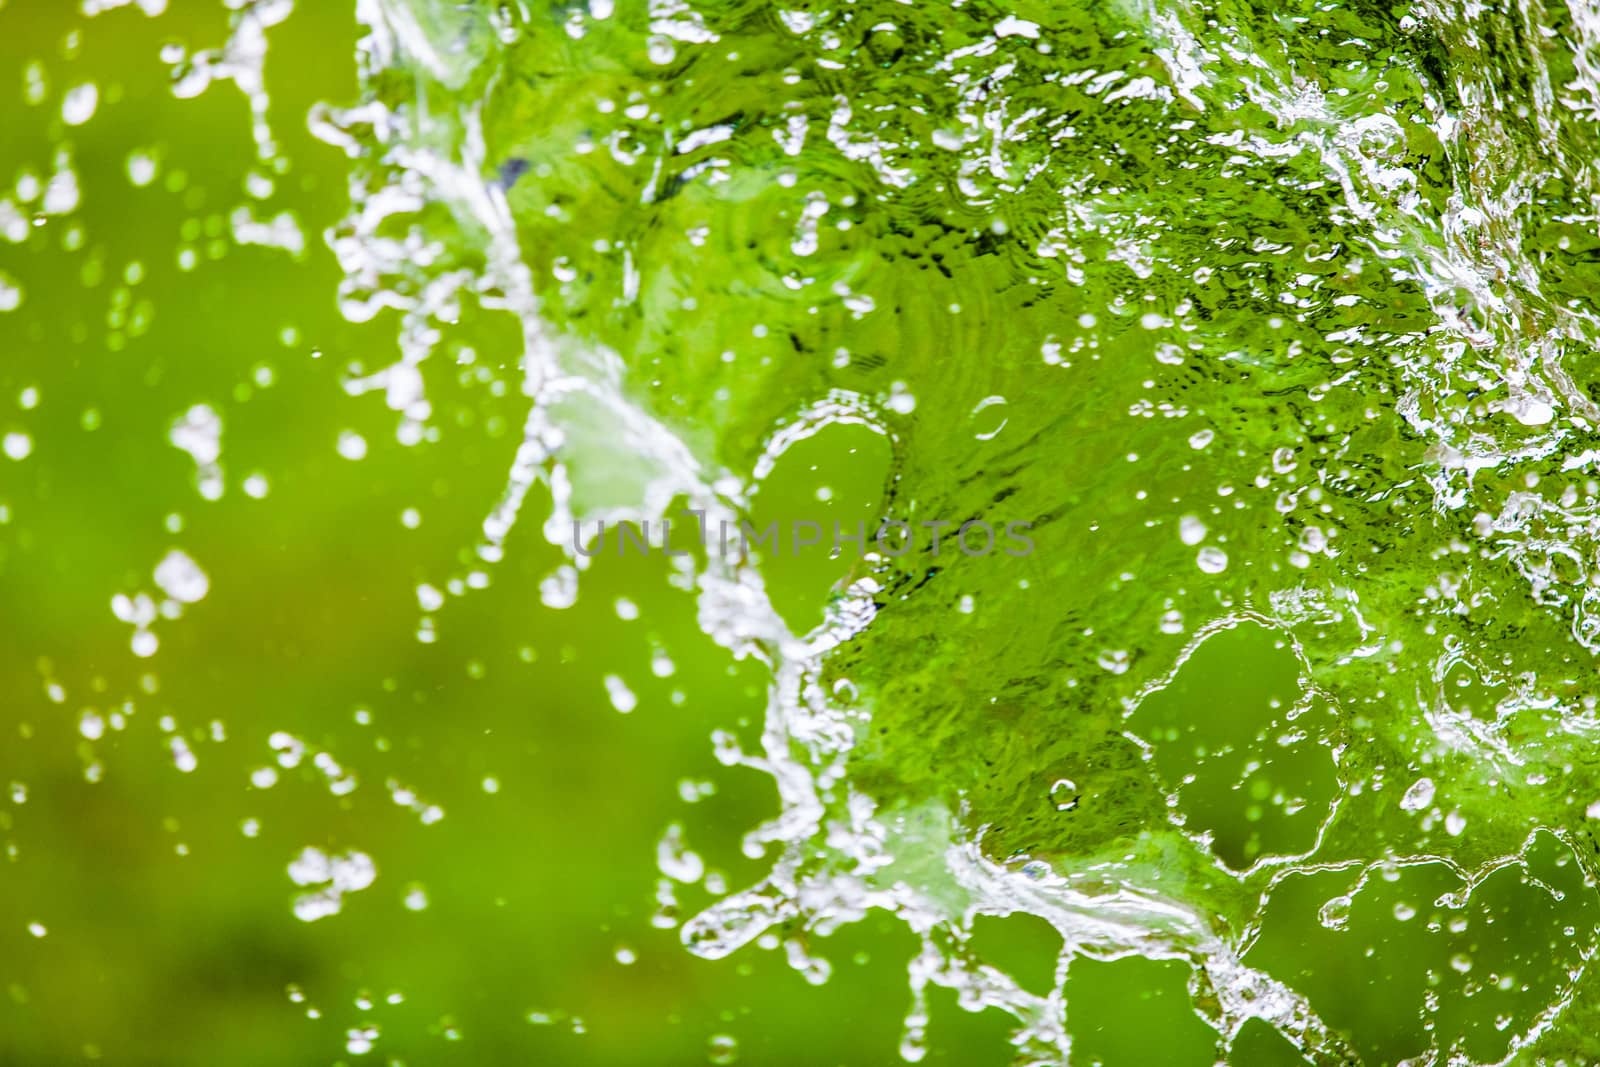 Falling Water Splash over Green Abstract Background